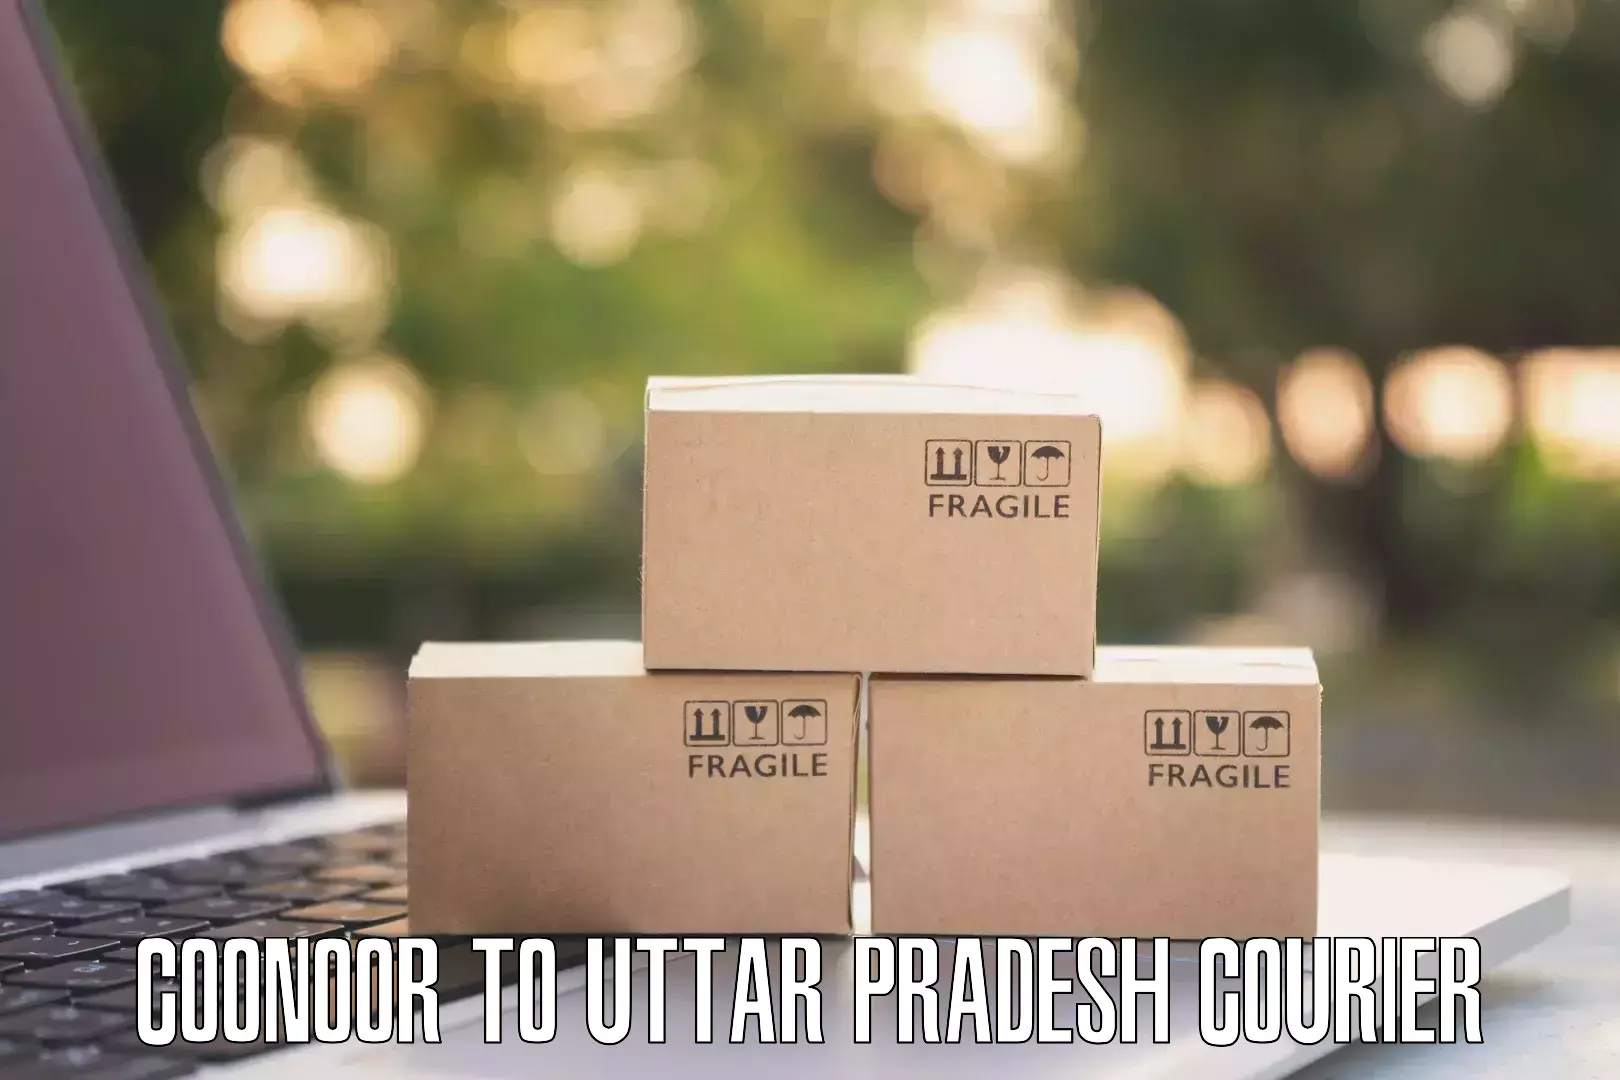 Customer-centric shipping in Coonoor to Vrindavan